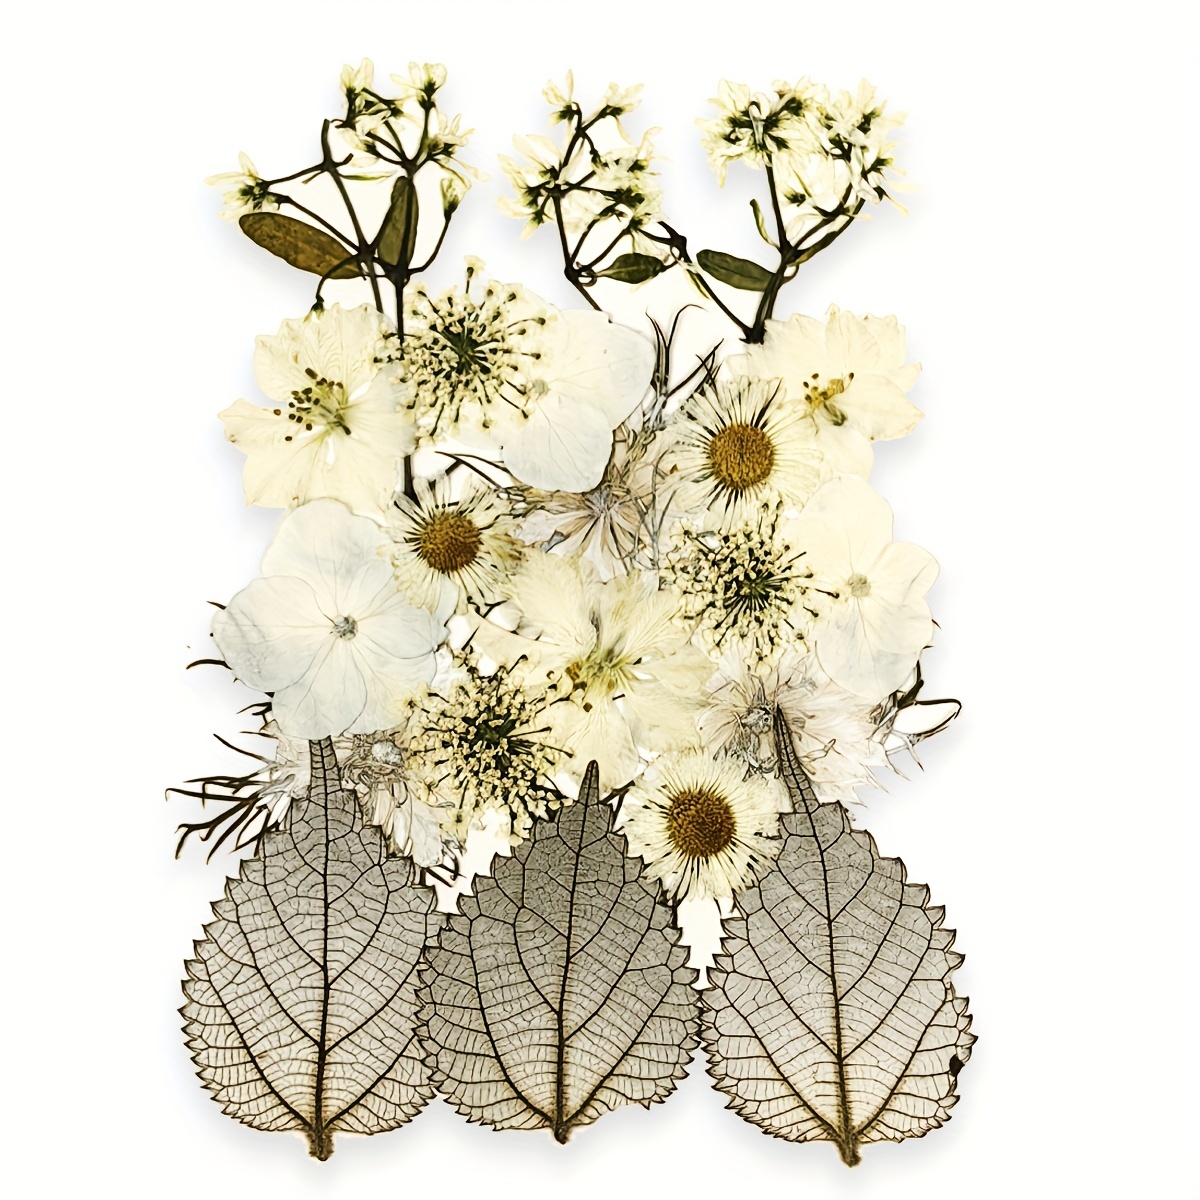 

White Dried Flowers Dried Pressed Flowers Leaves Pressed Flowers White Pressed Flowers For Resin Jewelry Scrapbooking Art Floral Decorations